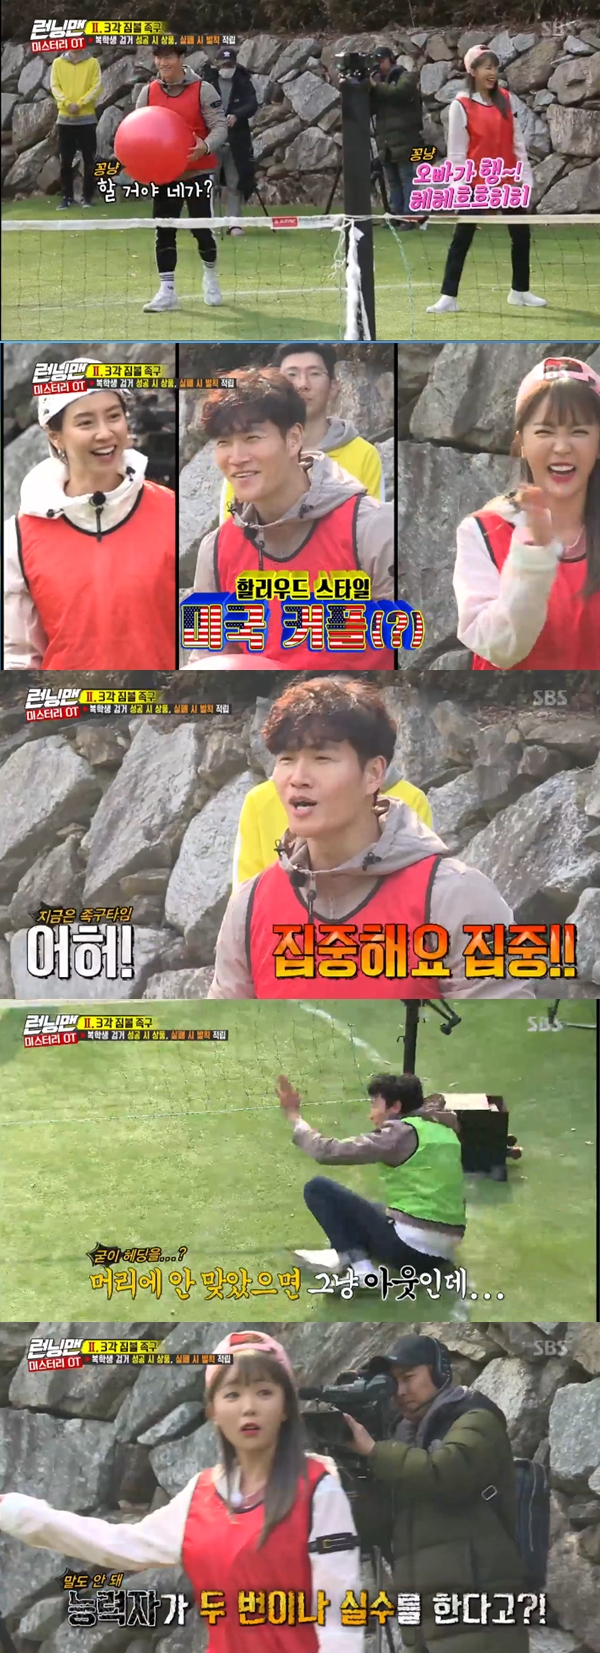 Kim Jong-kook team misunderstood as United States of America coupleIn the SBS entertainment program Running Man broadcasted on the afternoon of the 10th, Hong Jin-young, Kim Sang-rok, and Han-gam were guests and performed Mystery OT Race with the members as a freshman concept.In the first round of the race, which was conducted on a mission to find a returning student, the members pointed out that the second round game was a triangular Zimball footwear.The members and guests were divided into three teams and played the foot volleyball Kyonggi.Kyonggi began and the members tried to find the deliberately losing member, the hidden mission of the returning student.At that point Kim Jong-kook asked the same team member Hong Jin-young affectionately, You are a chalet.Hong Jin-young replied, No, just my brother is a car with a charming voice.Haha, who saw this, looked suspiciously at Kim Jong-kook team, saying, What is this situation?Kim Jong-kook team also had Song Ji-hyo in addition to Hong Jin-young.Haha laughed, saying, Is not it a United States of America couple here?Meanwhile, in the second round game, Lee Kwang-soo and Han Da-gam and Kim Jong-kook were suspected of returning students.